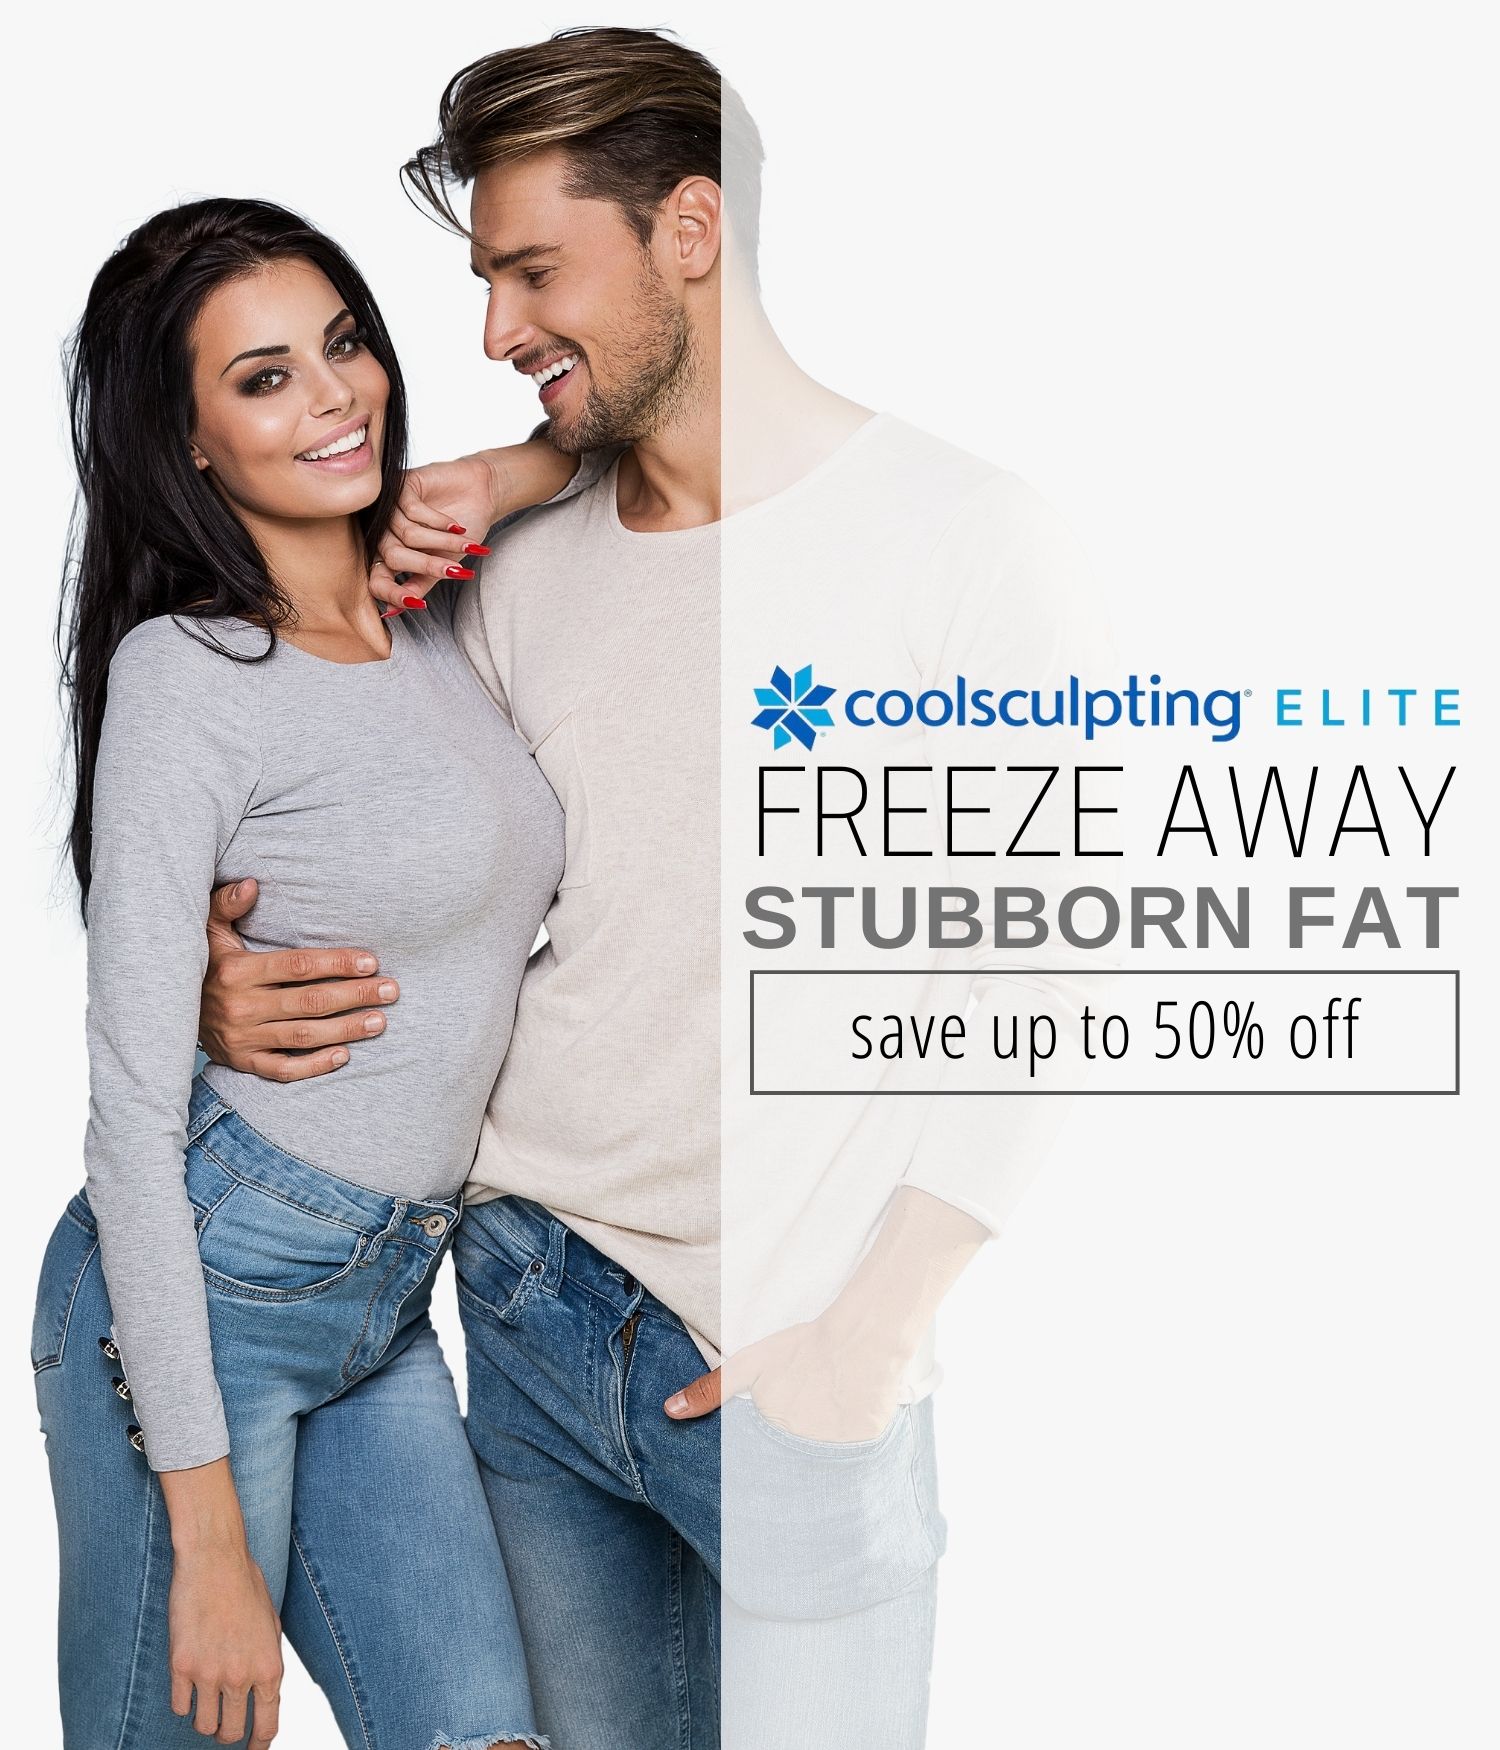 Couple with fit body promoting a CoolSculpting Elite Treatment